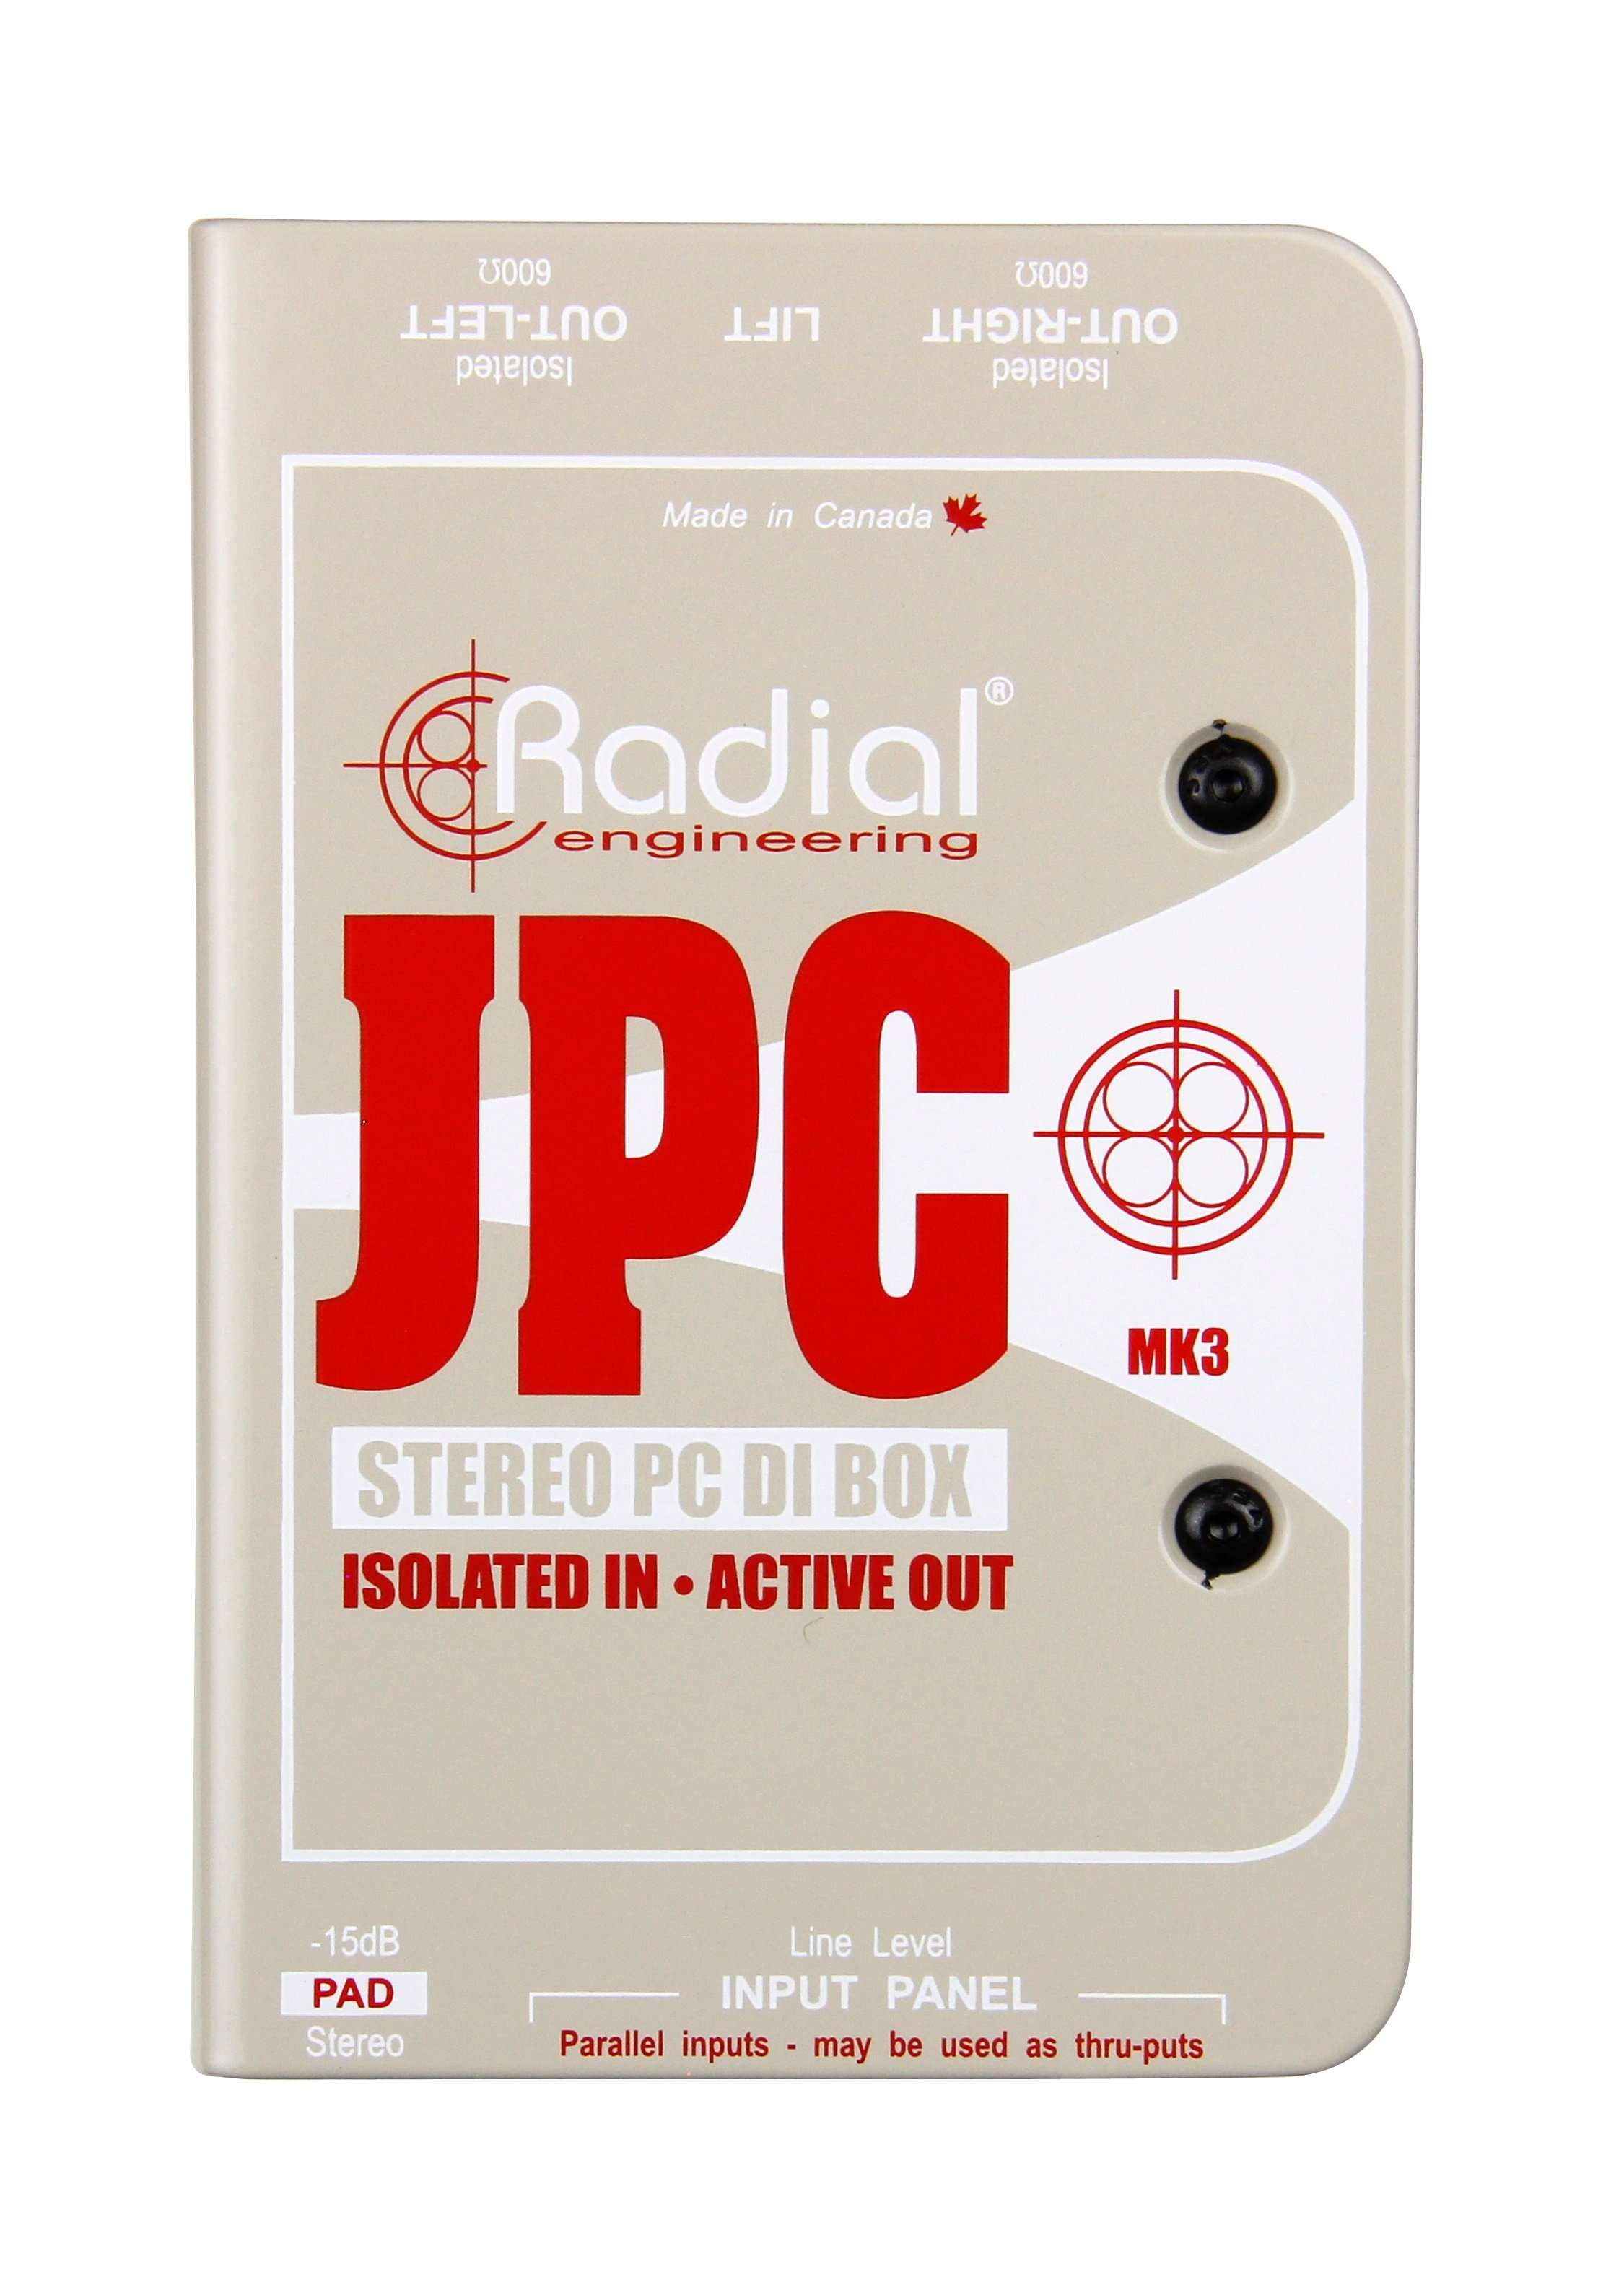 radial-engineering-jpc--active-di-box-for-laptops-and-line-sources.jpg